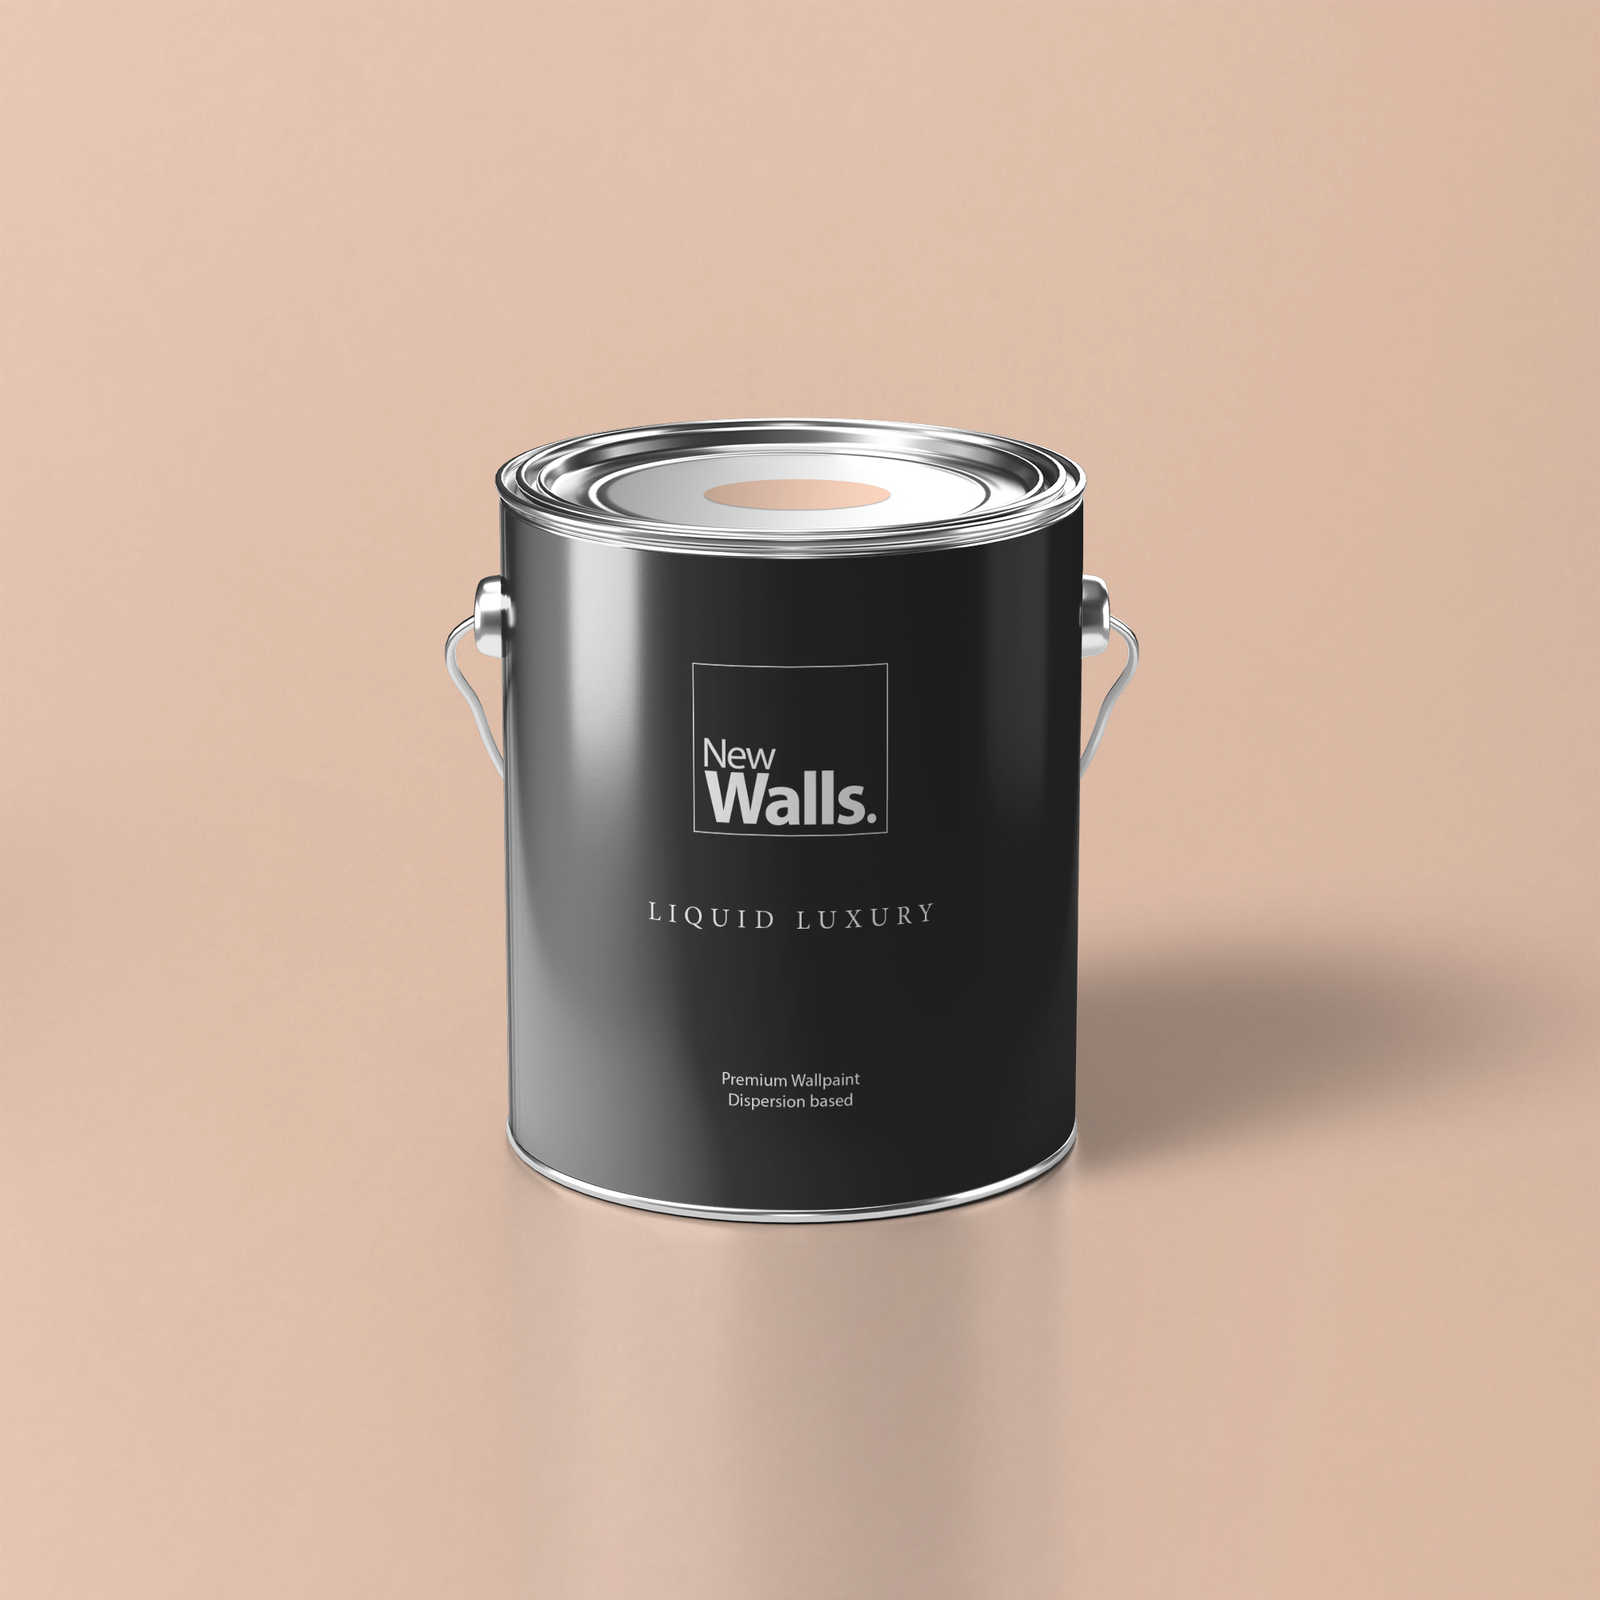 Premium Wall Paint lovely apricot »Active Apricot« NW911 – 5 litre
